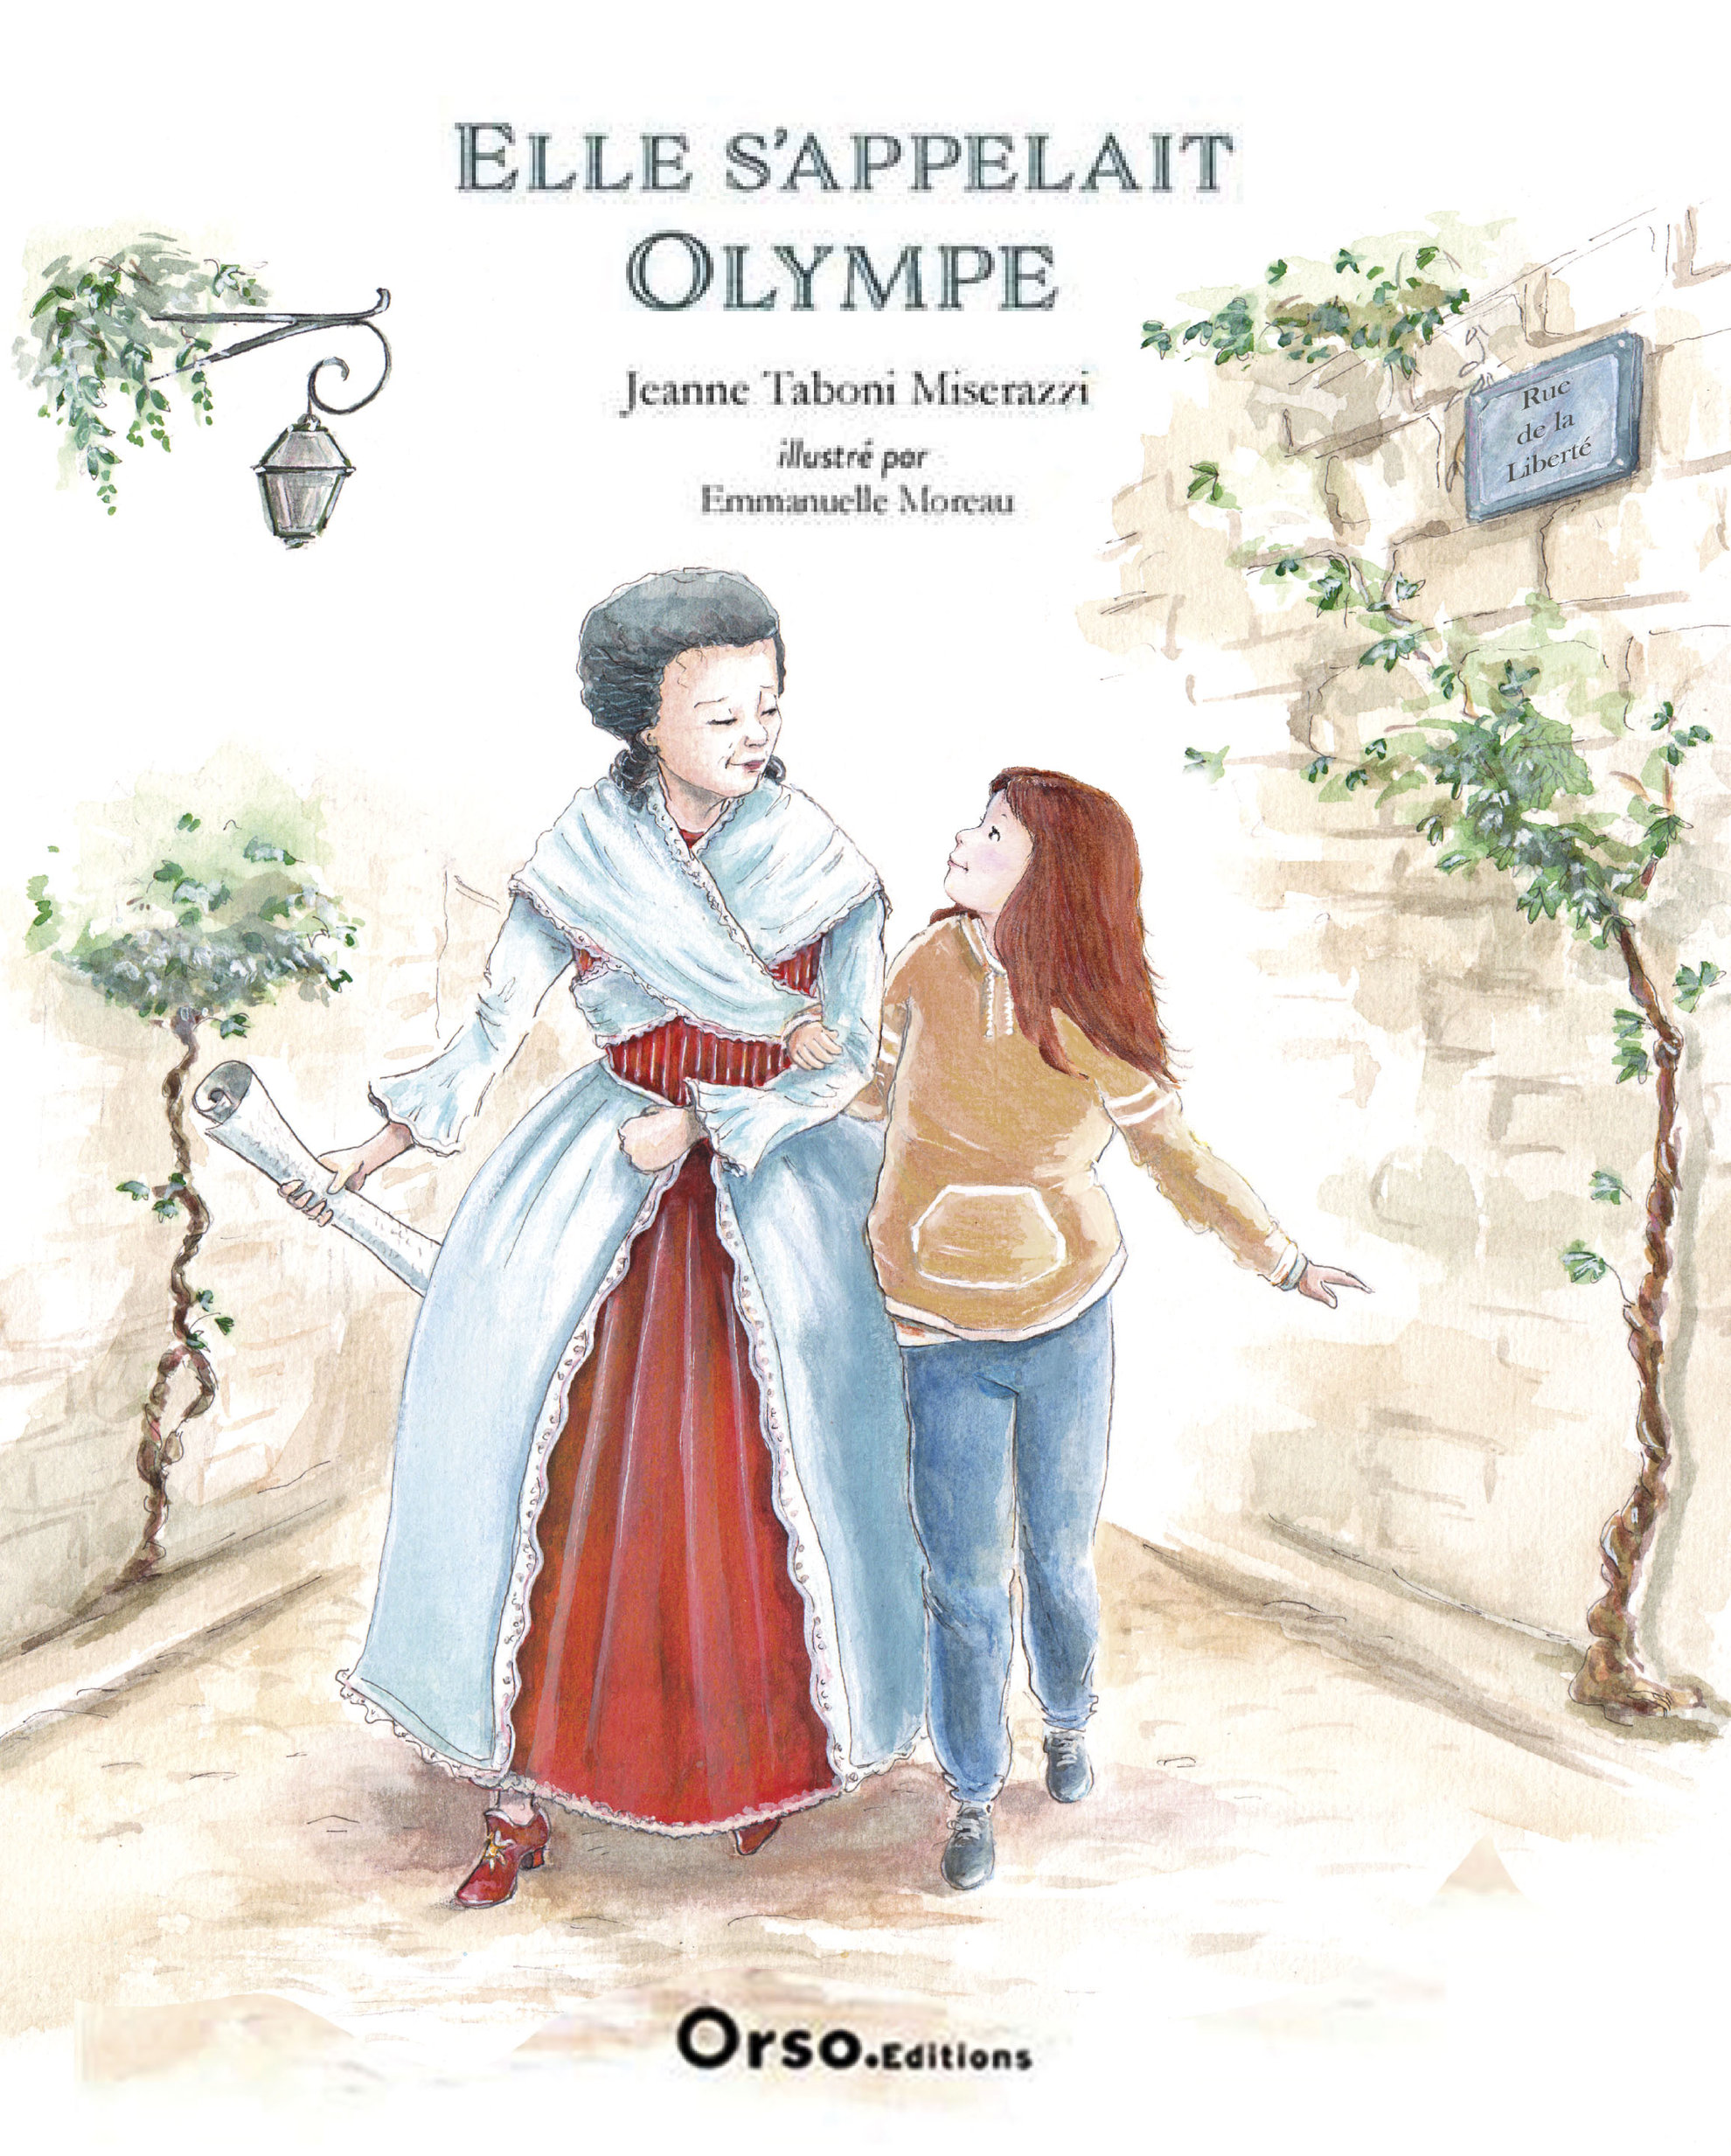 Elle s'appelait Olympe- Orso Editions